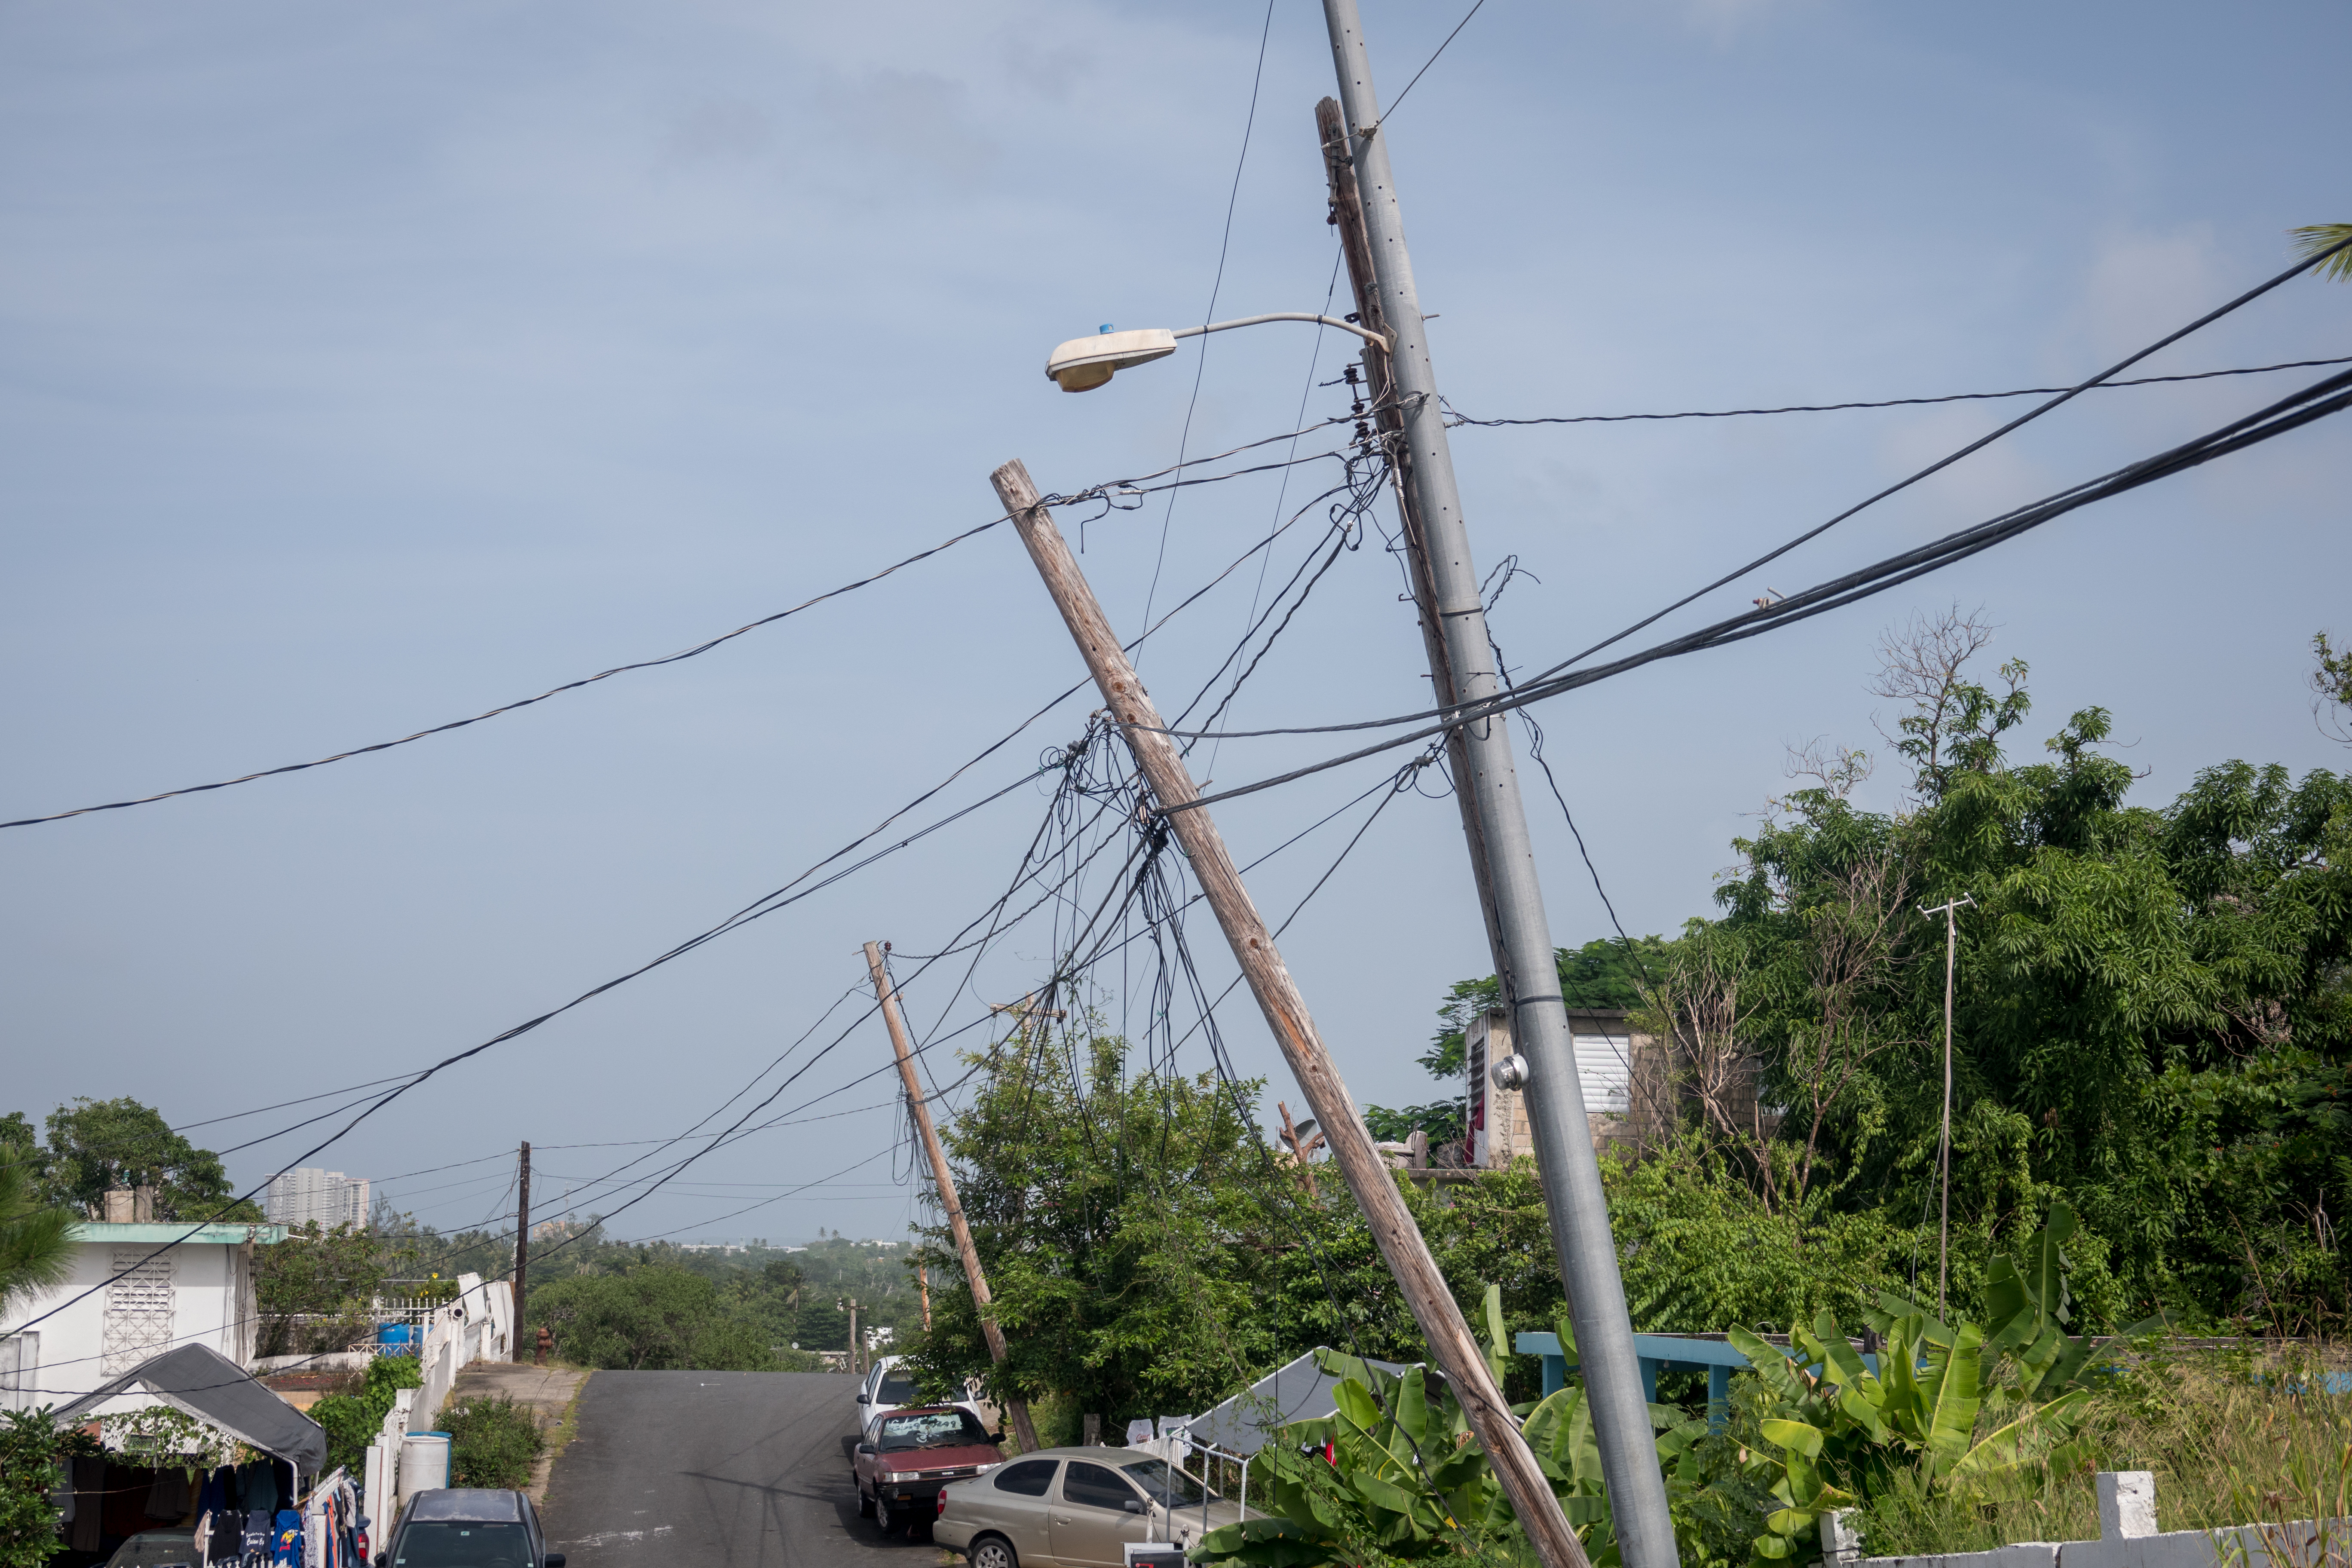 Light poles listing to the side since Hurricane Maria touched land, on September 19, 2018 in Luquillo, Puerto Rico. (Angel Valentin/Getty Images)